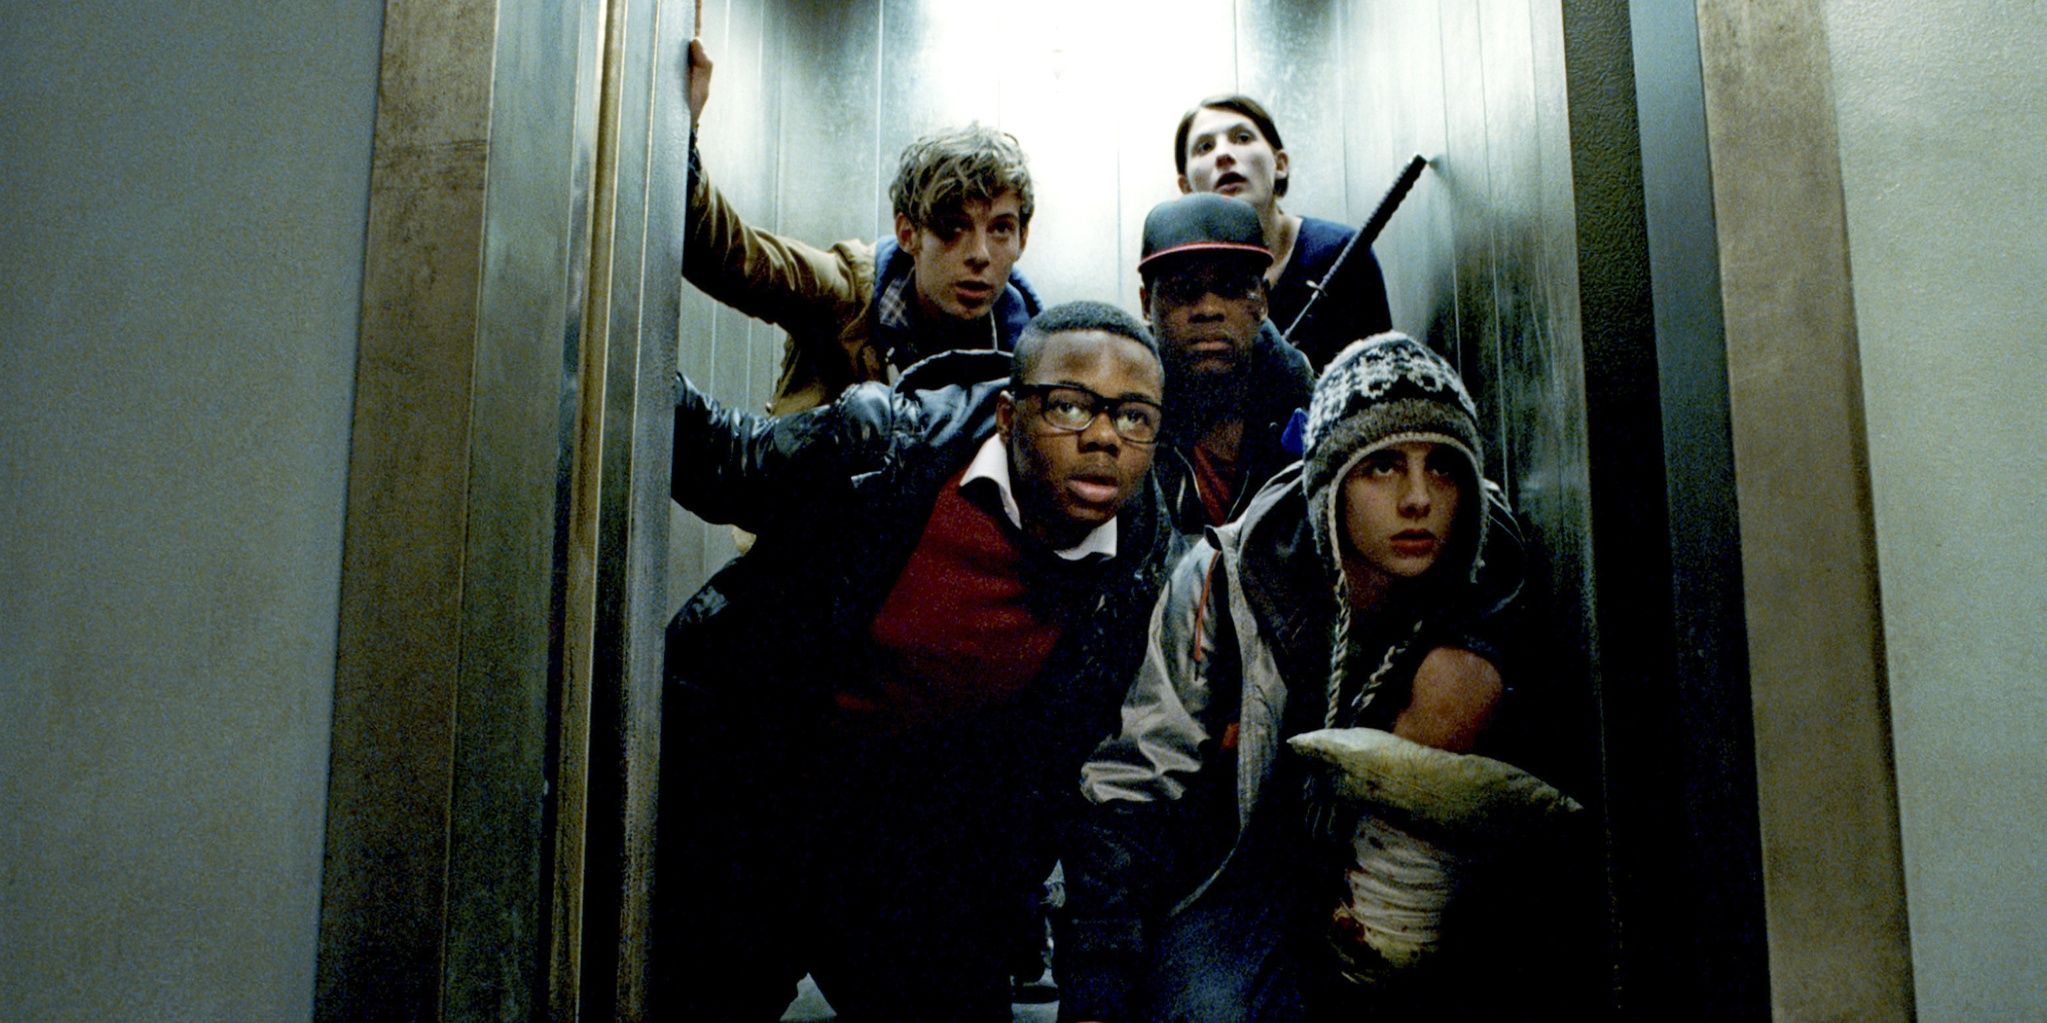 The kids in the elevator in Attack the Block (2011)